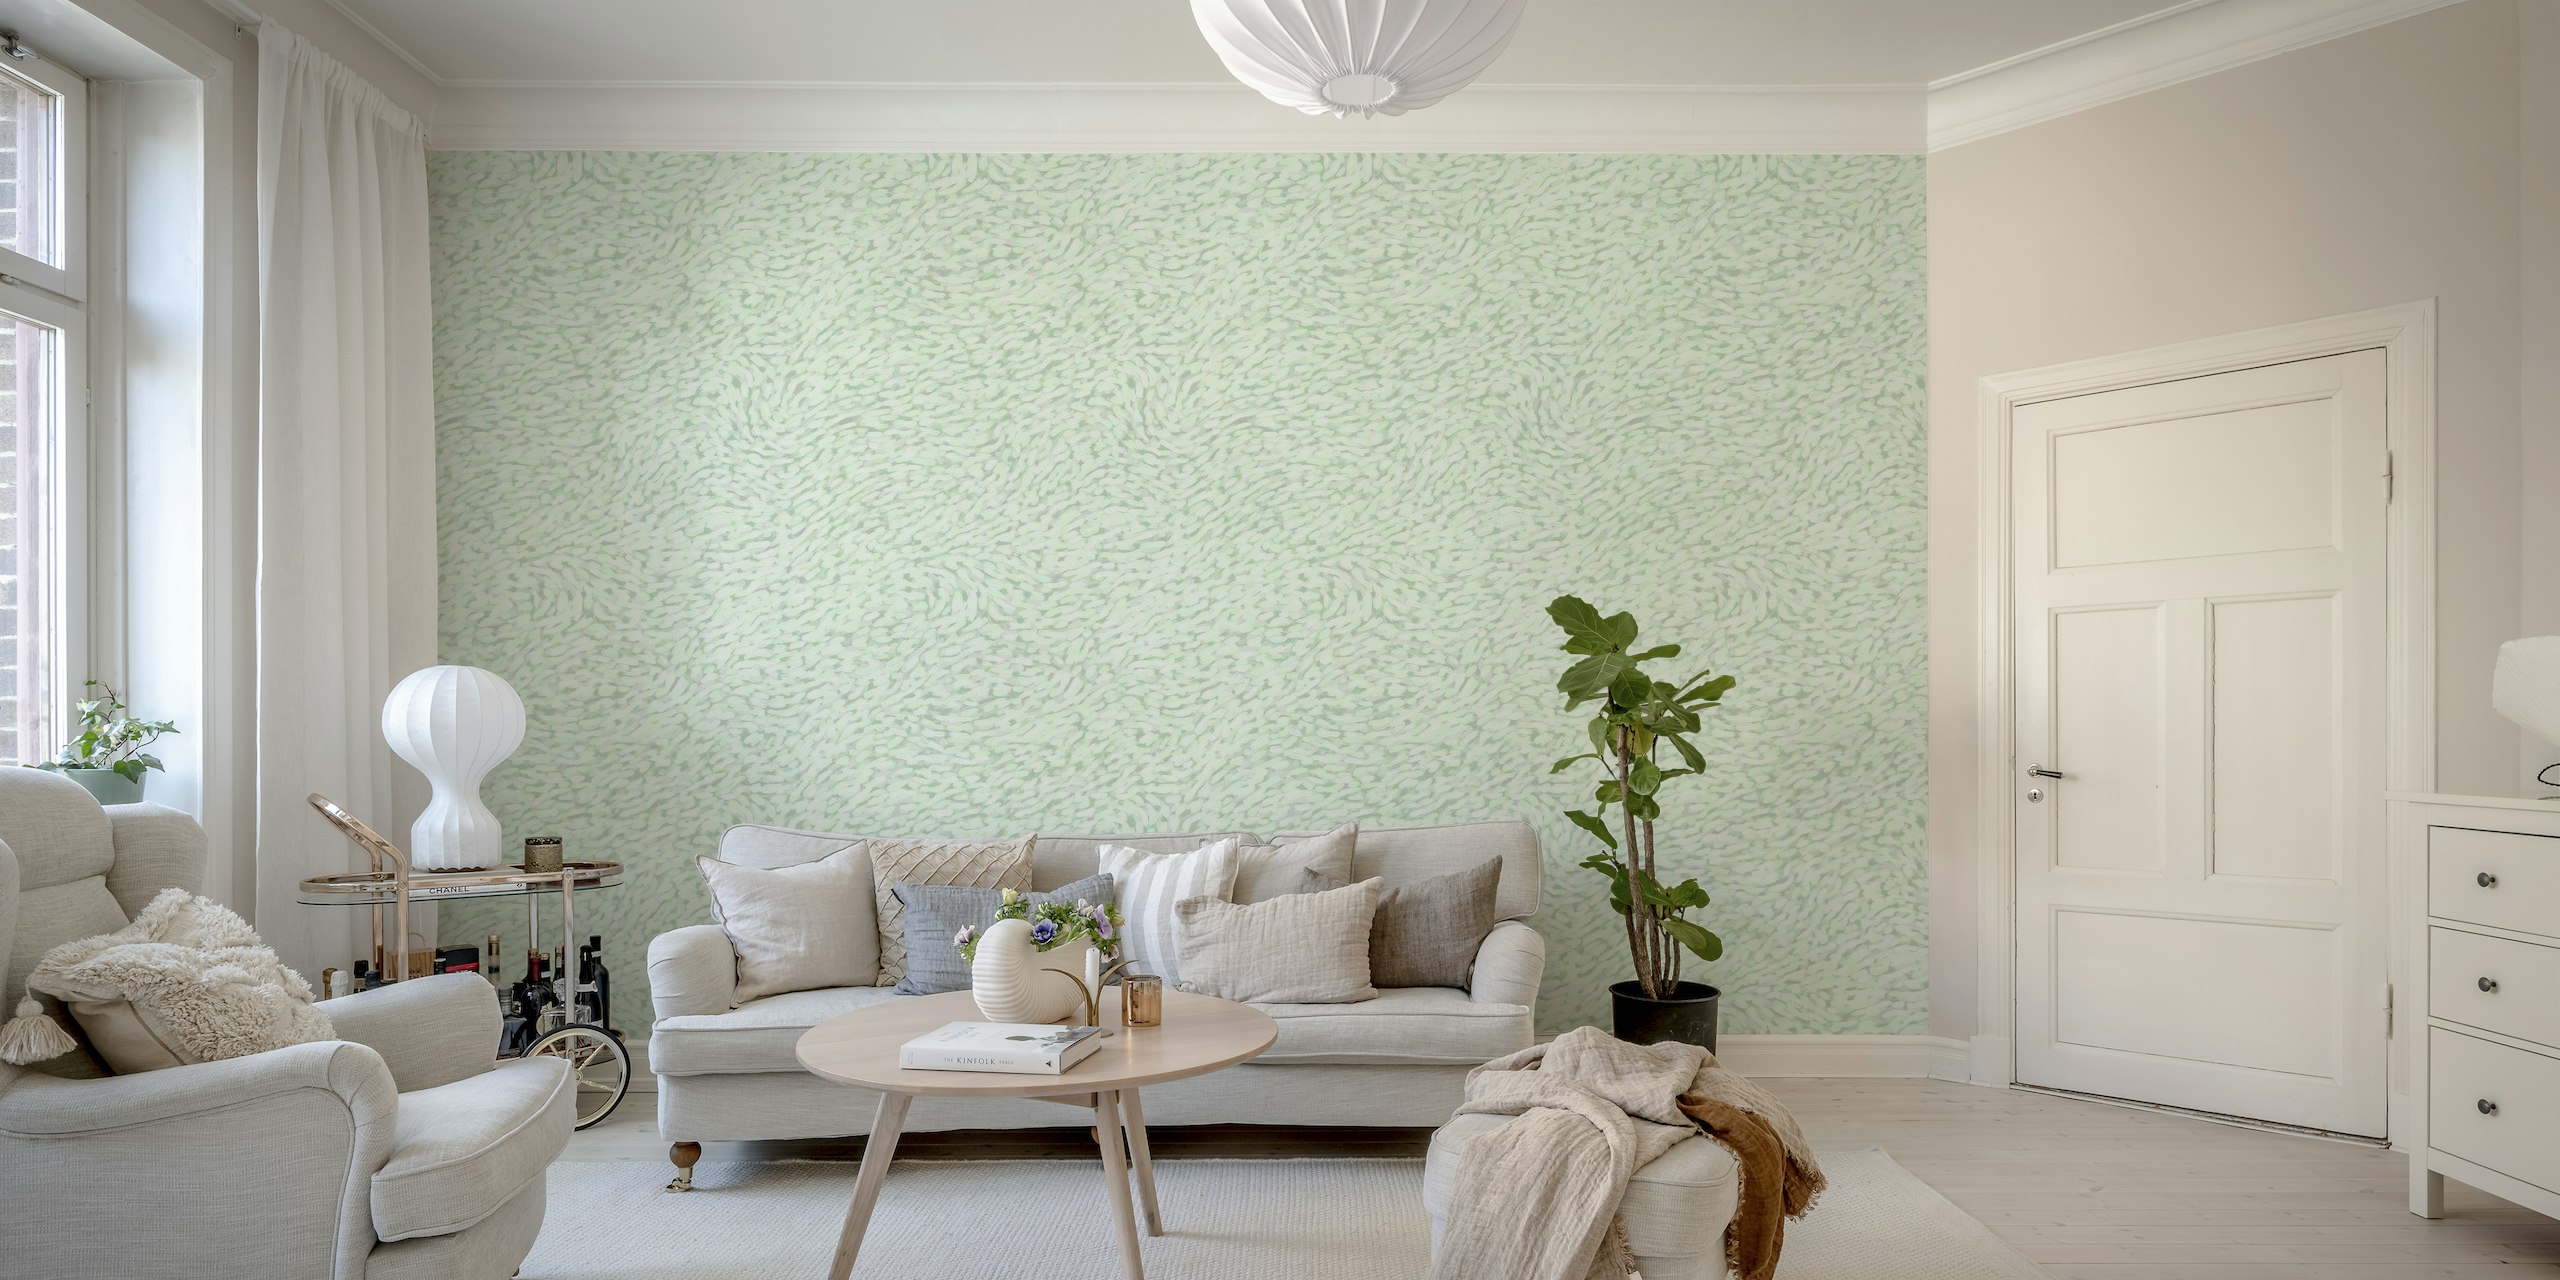 Green textured wall mural with flowing abstract pattern